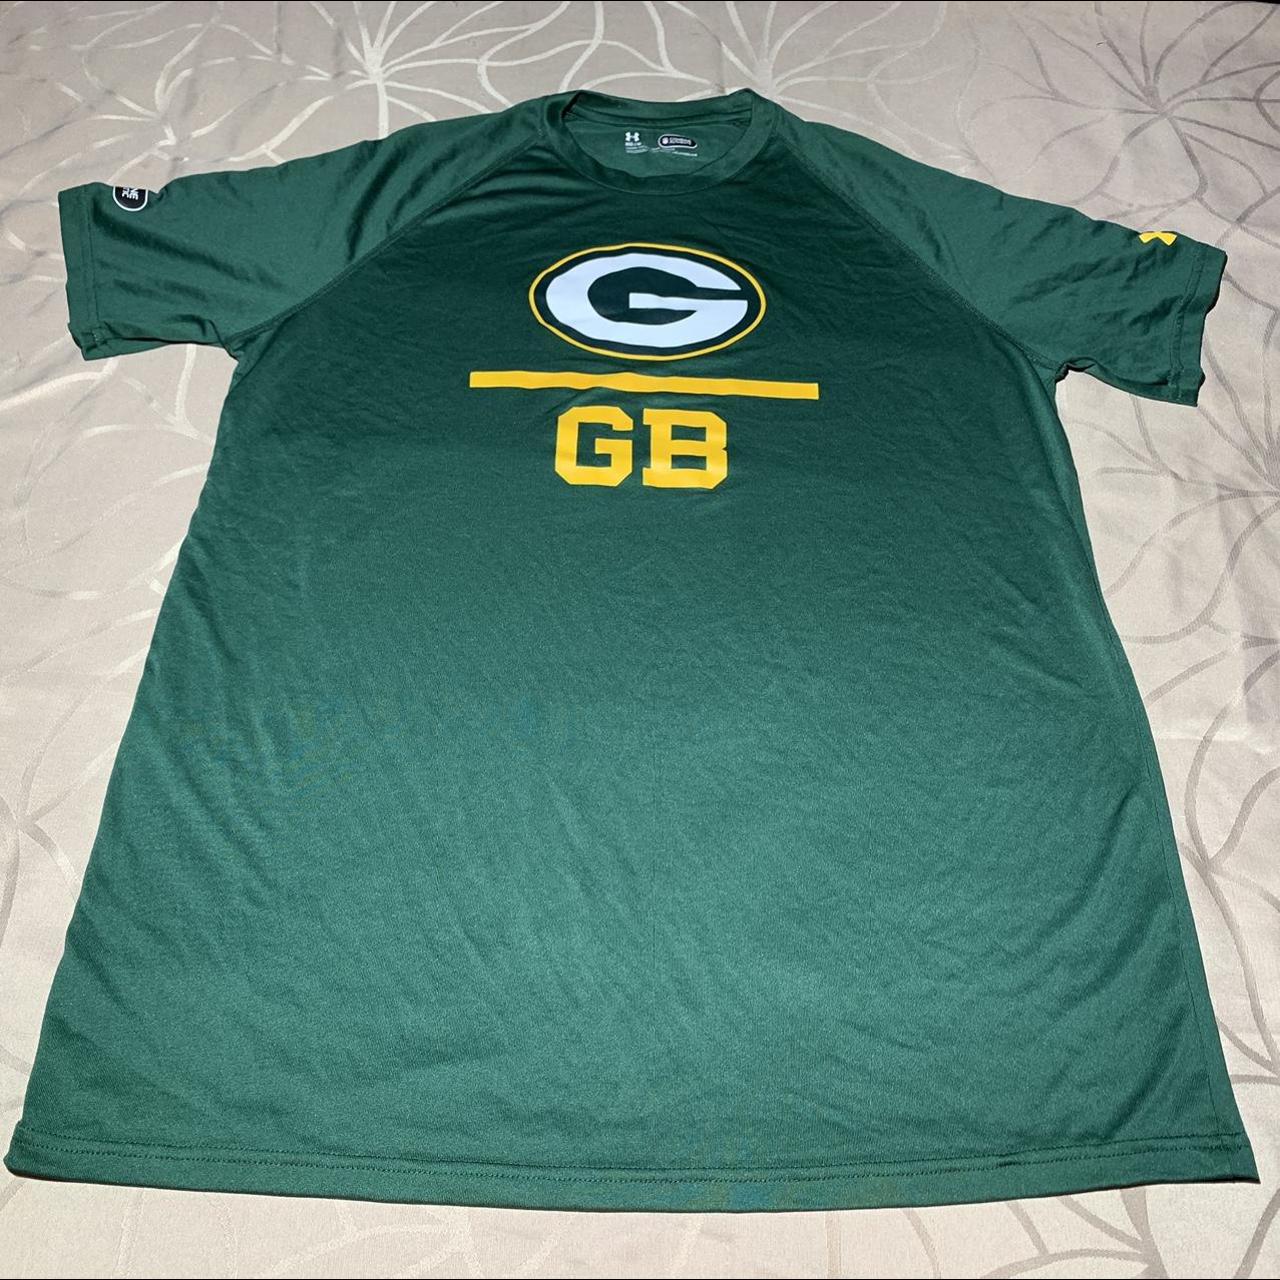 Under Armour Combine Authentic NFL Green Bay Packers - Depop